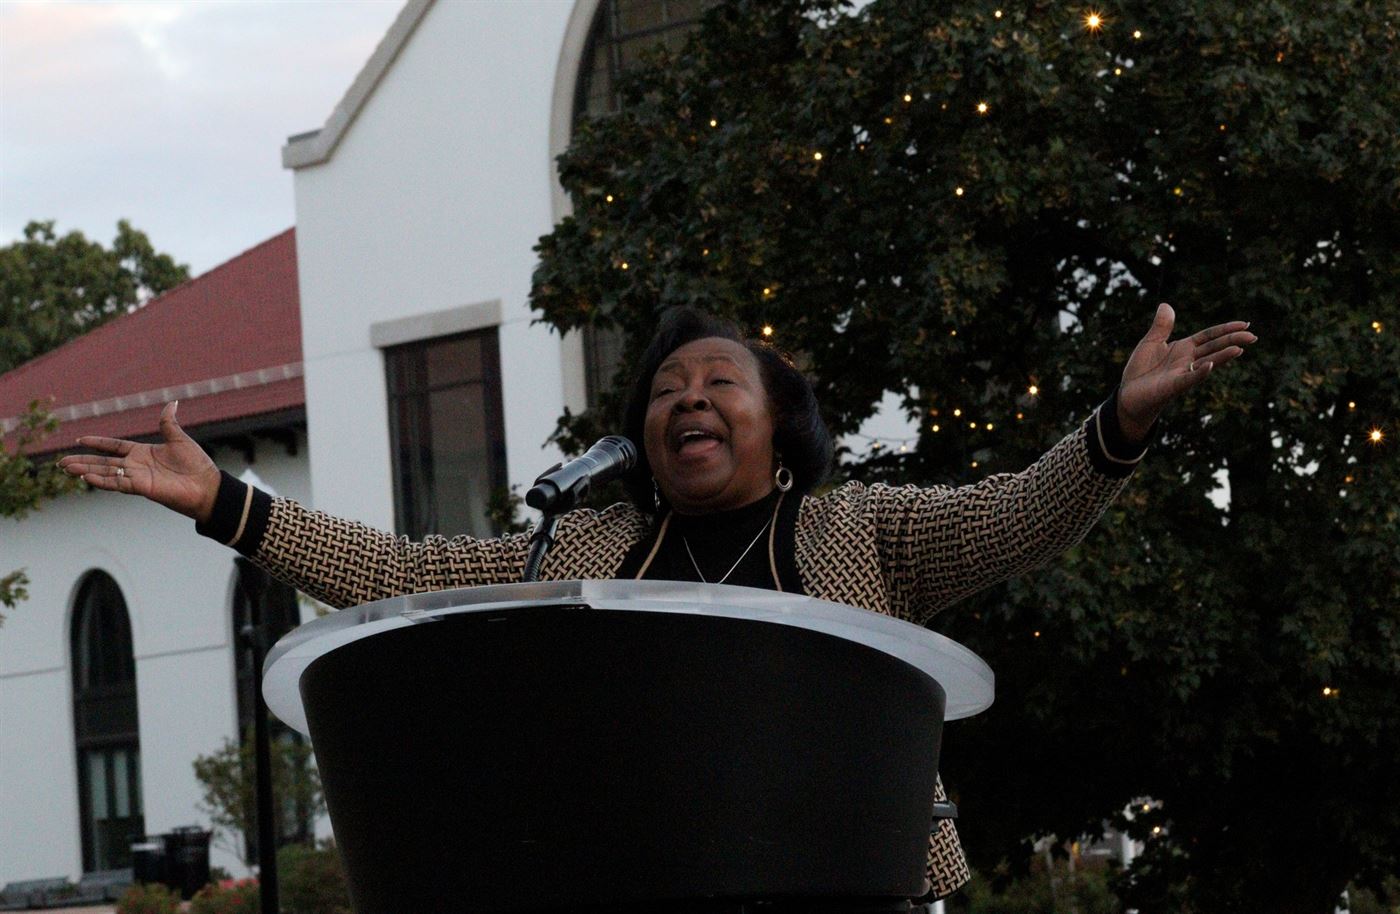 Margaree Coleman-Carter preaching for all students and faculty to remain hopeful. John LaRosa | The Montclarion